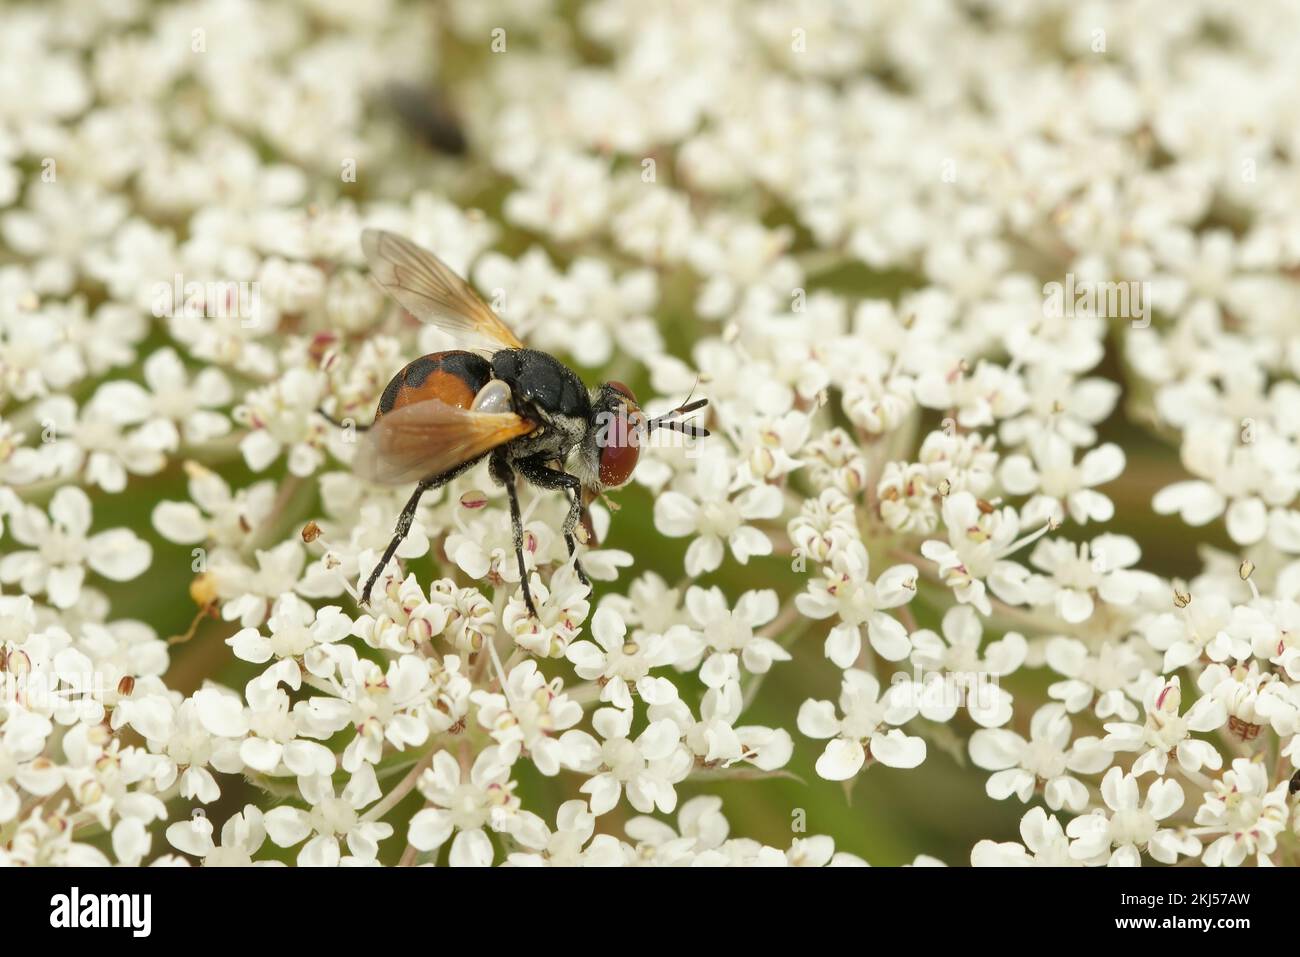 Natural closeup on a small Tachinid fly, Gymnosoma nudifrons sitting on white flower Stock Photo